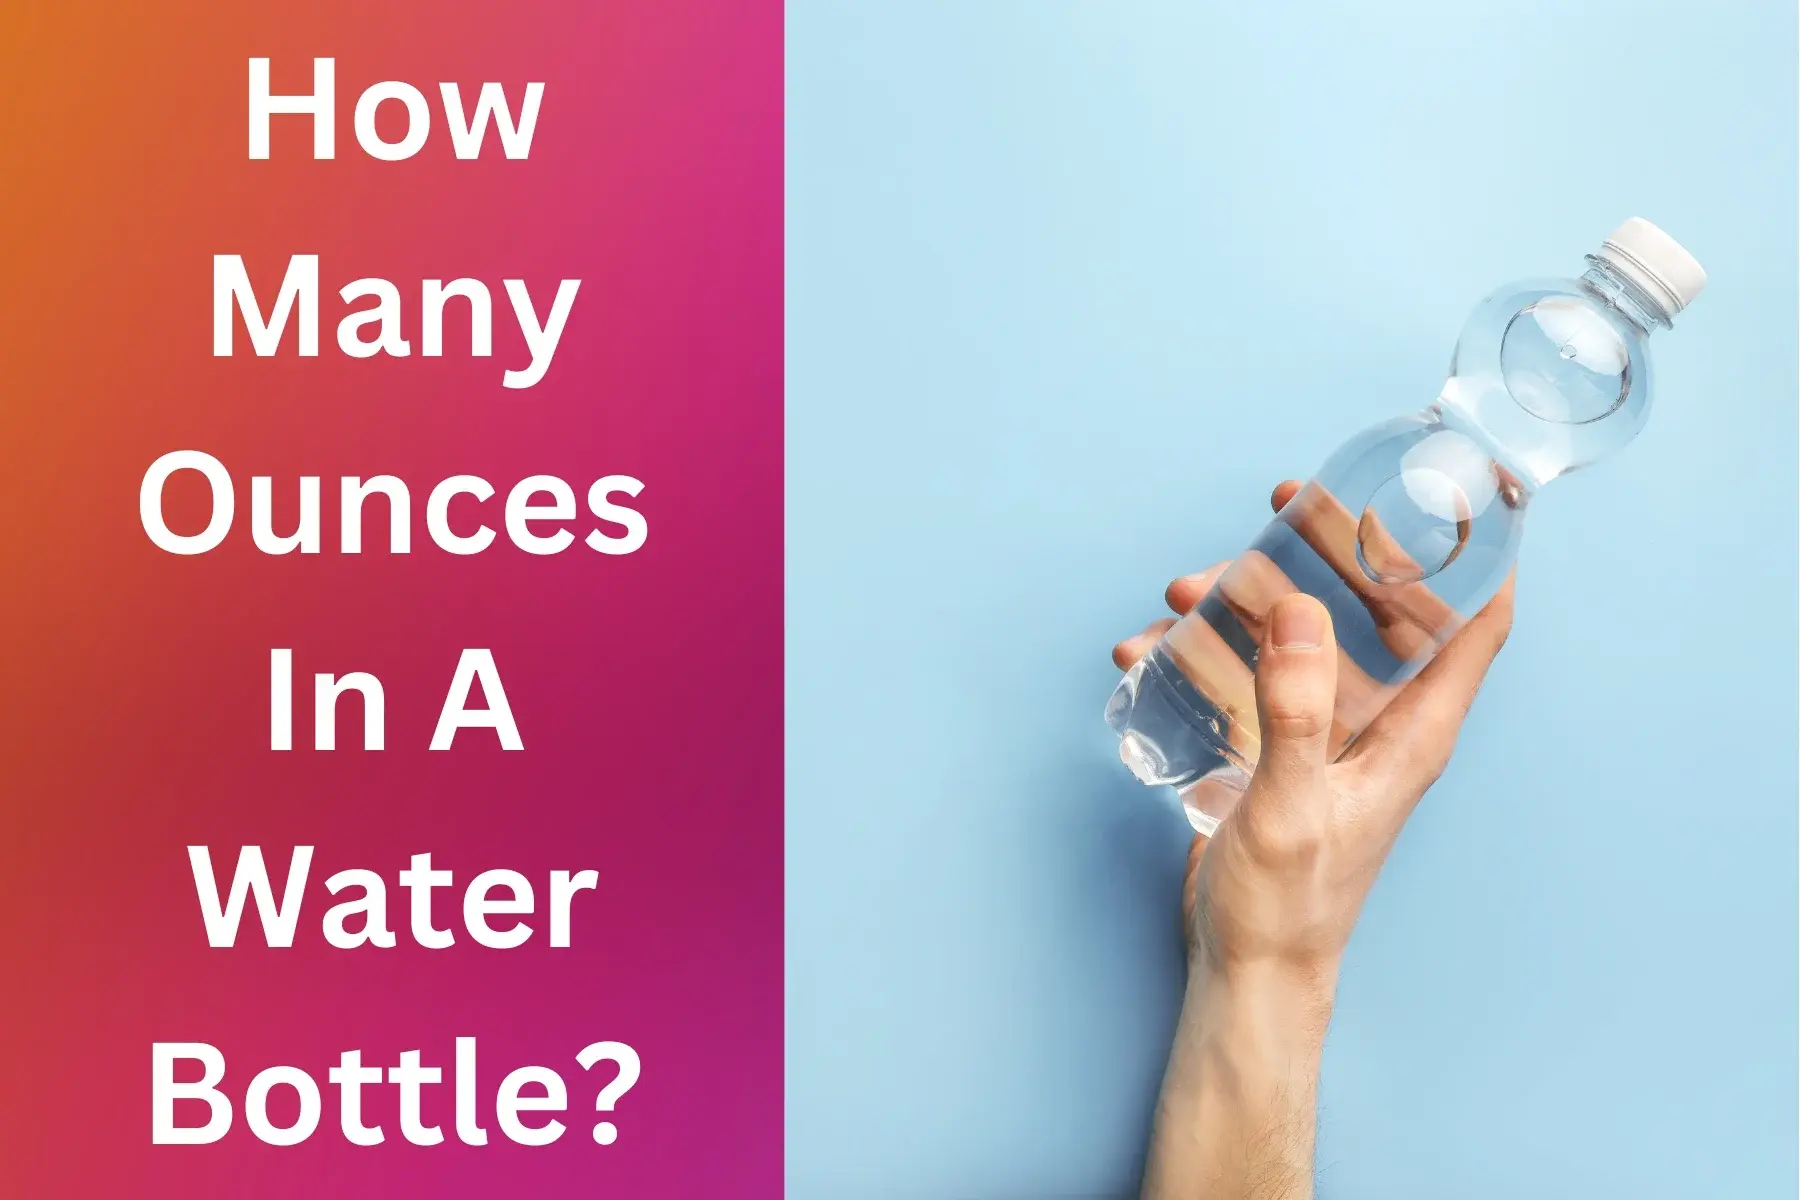 How Many Ounces In a Water Bottle?